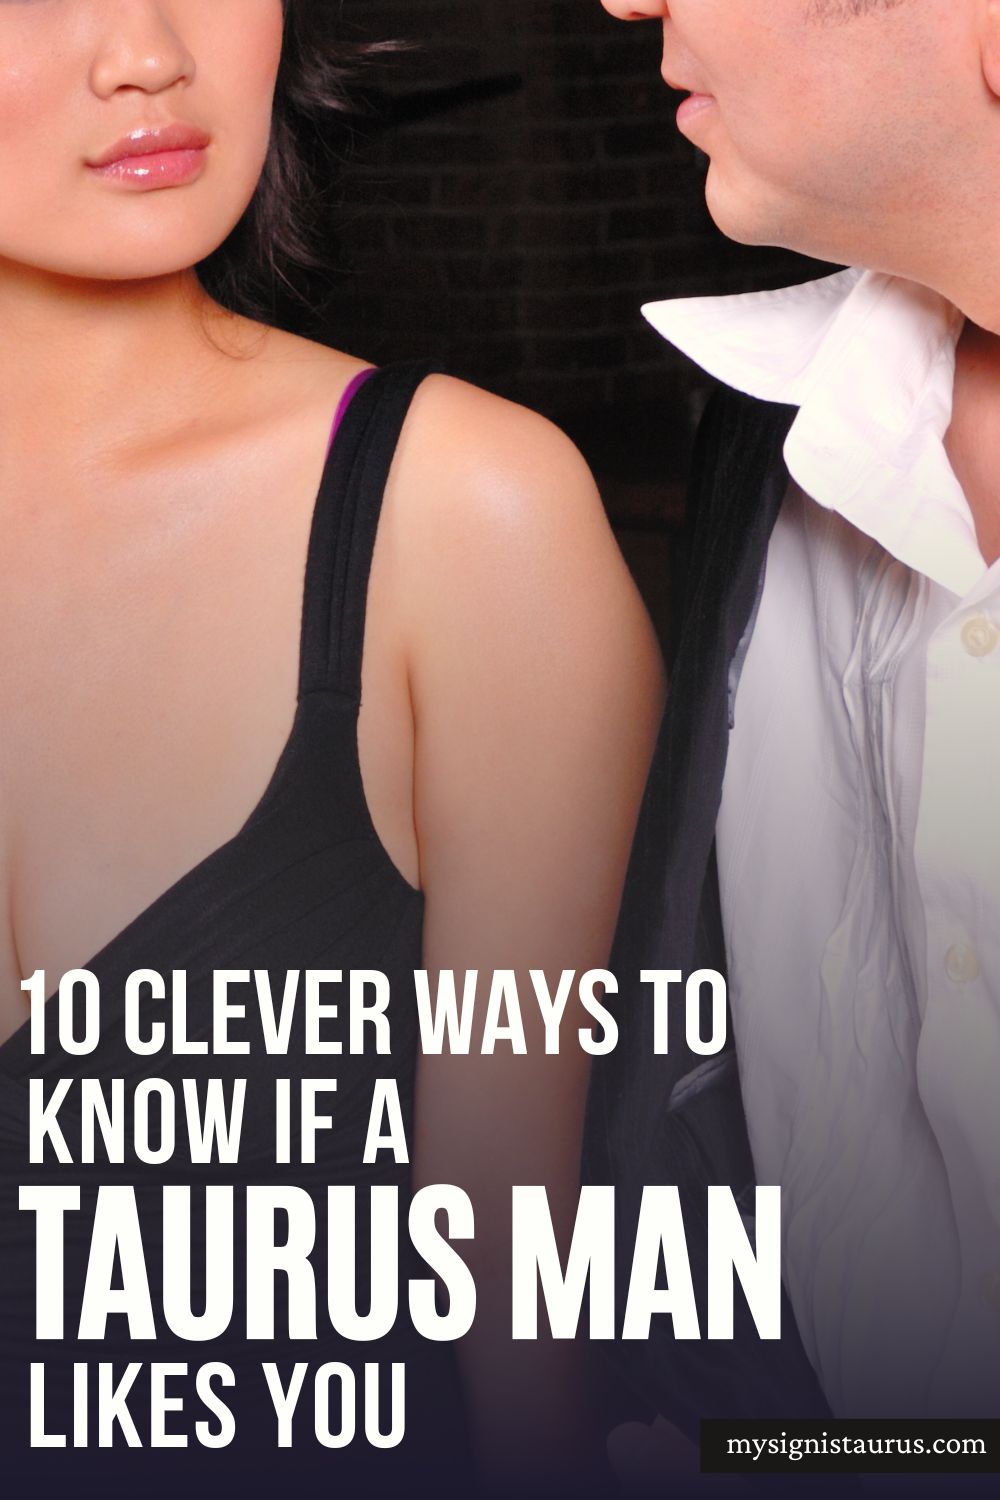 10 Clever Ways To Know If A Taurus Man Likes You